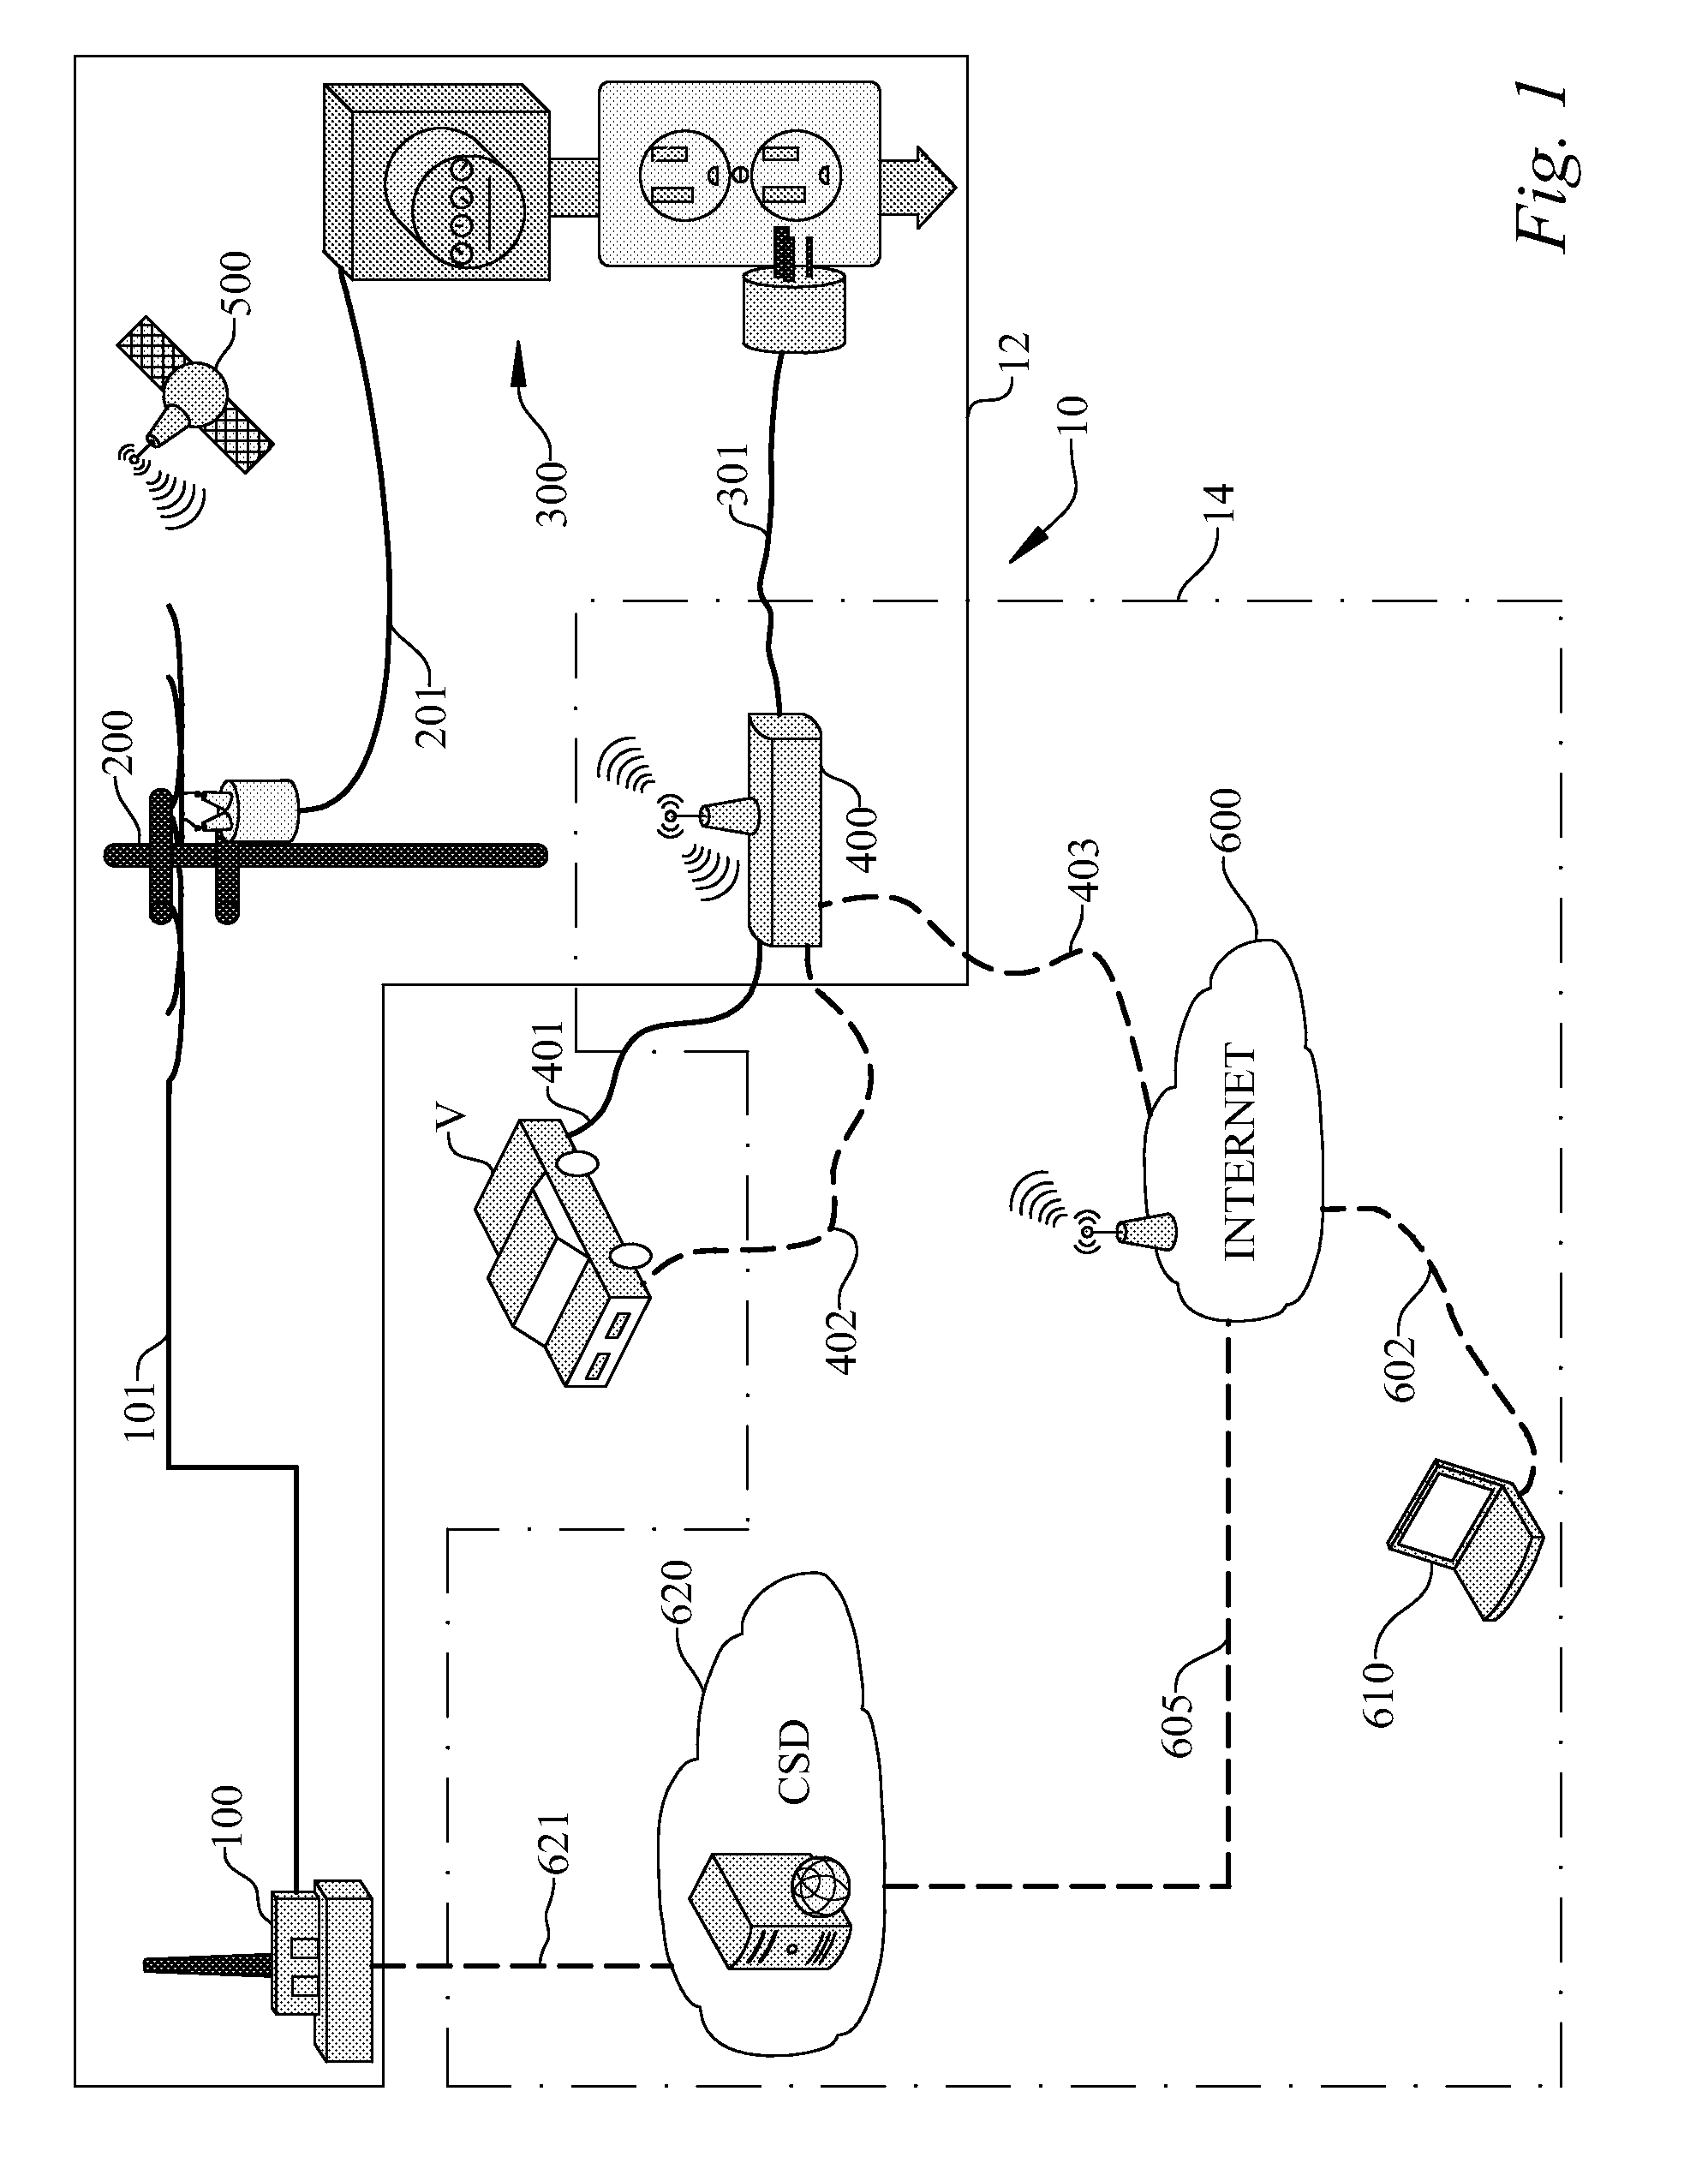 Mobile intelligent metering and charging system for charging uniquely identifiable chargeable vehicle destinations and method for employing same